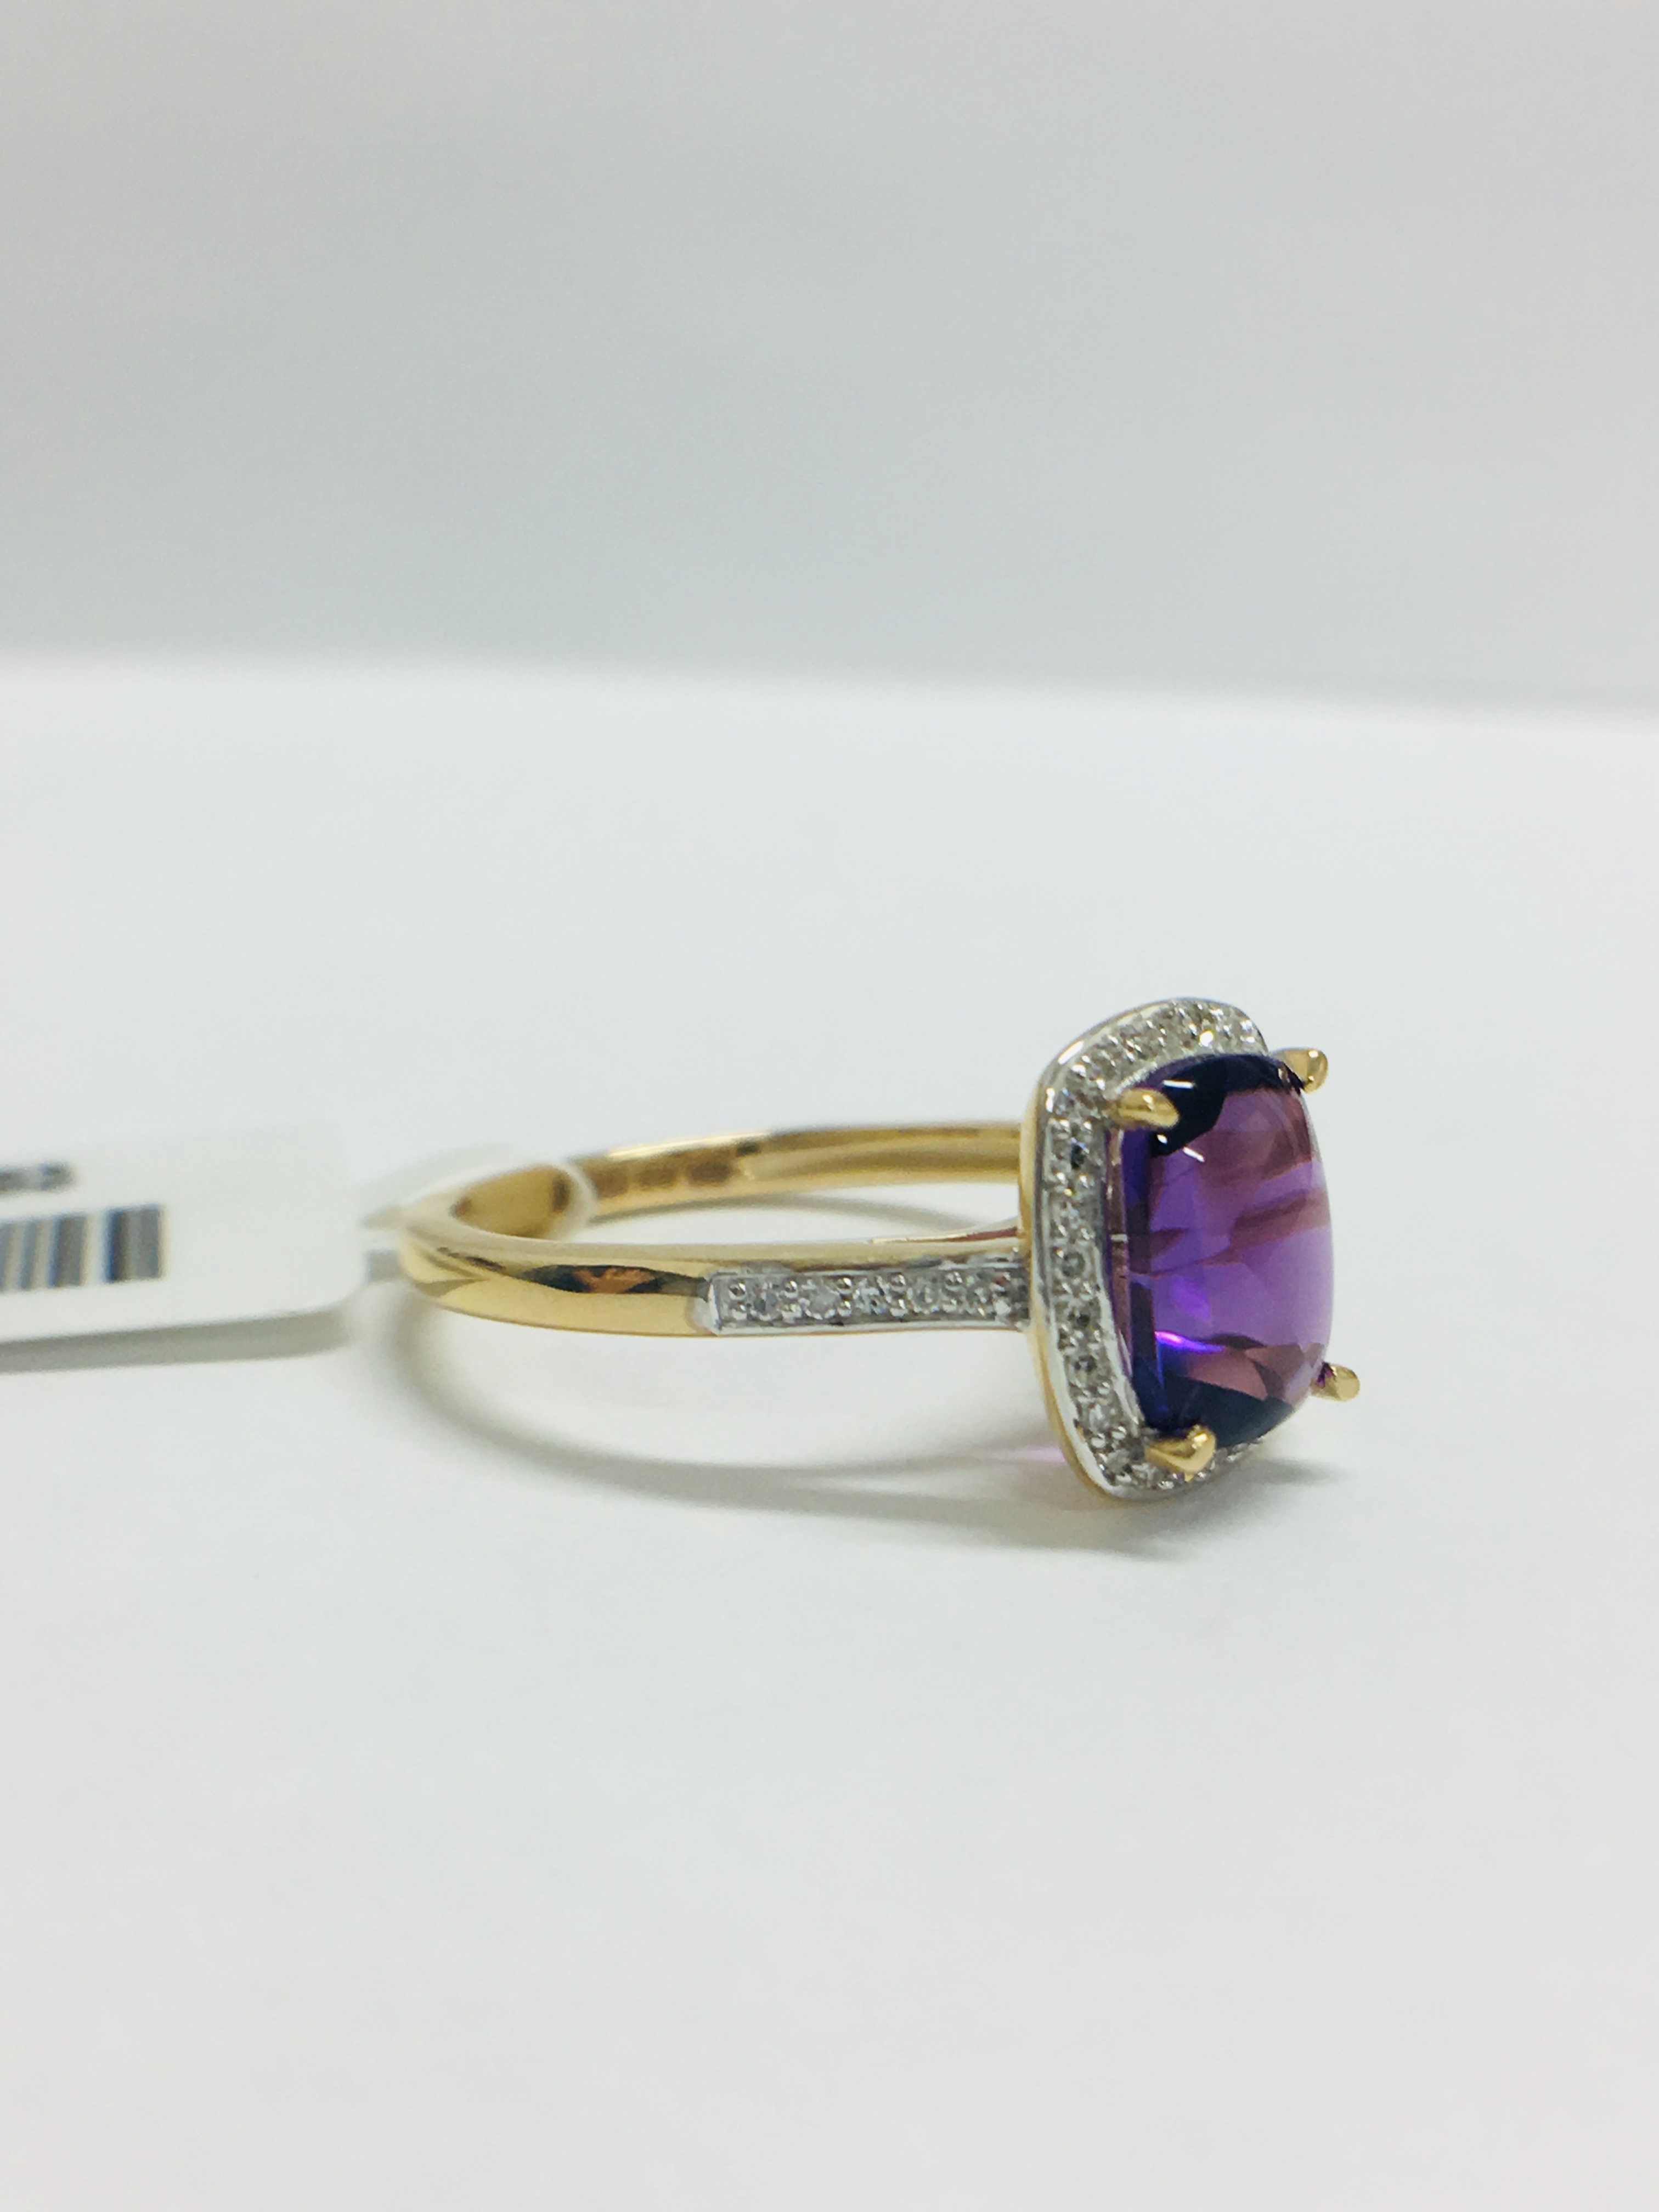 9ct yellow gold Amethyst and diamond ring - Image 8 of 11